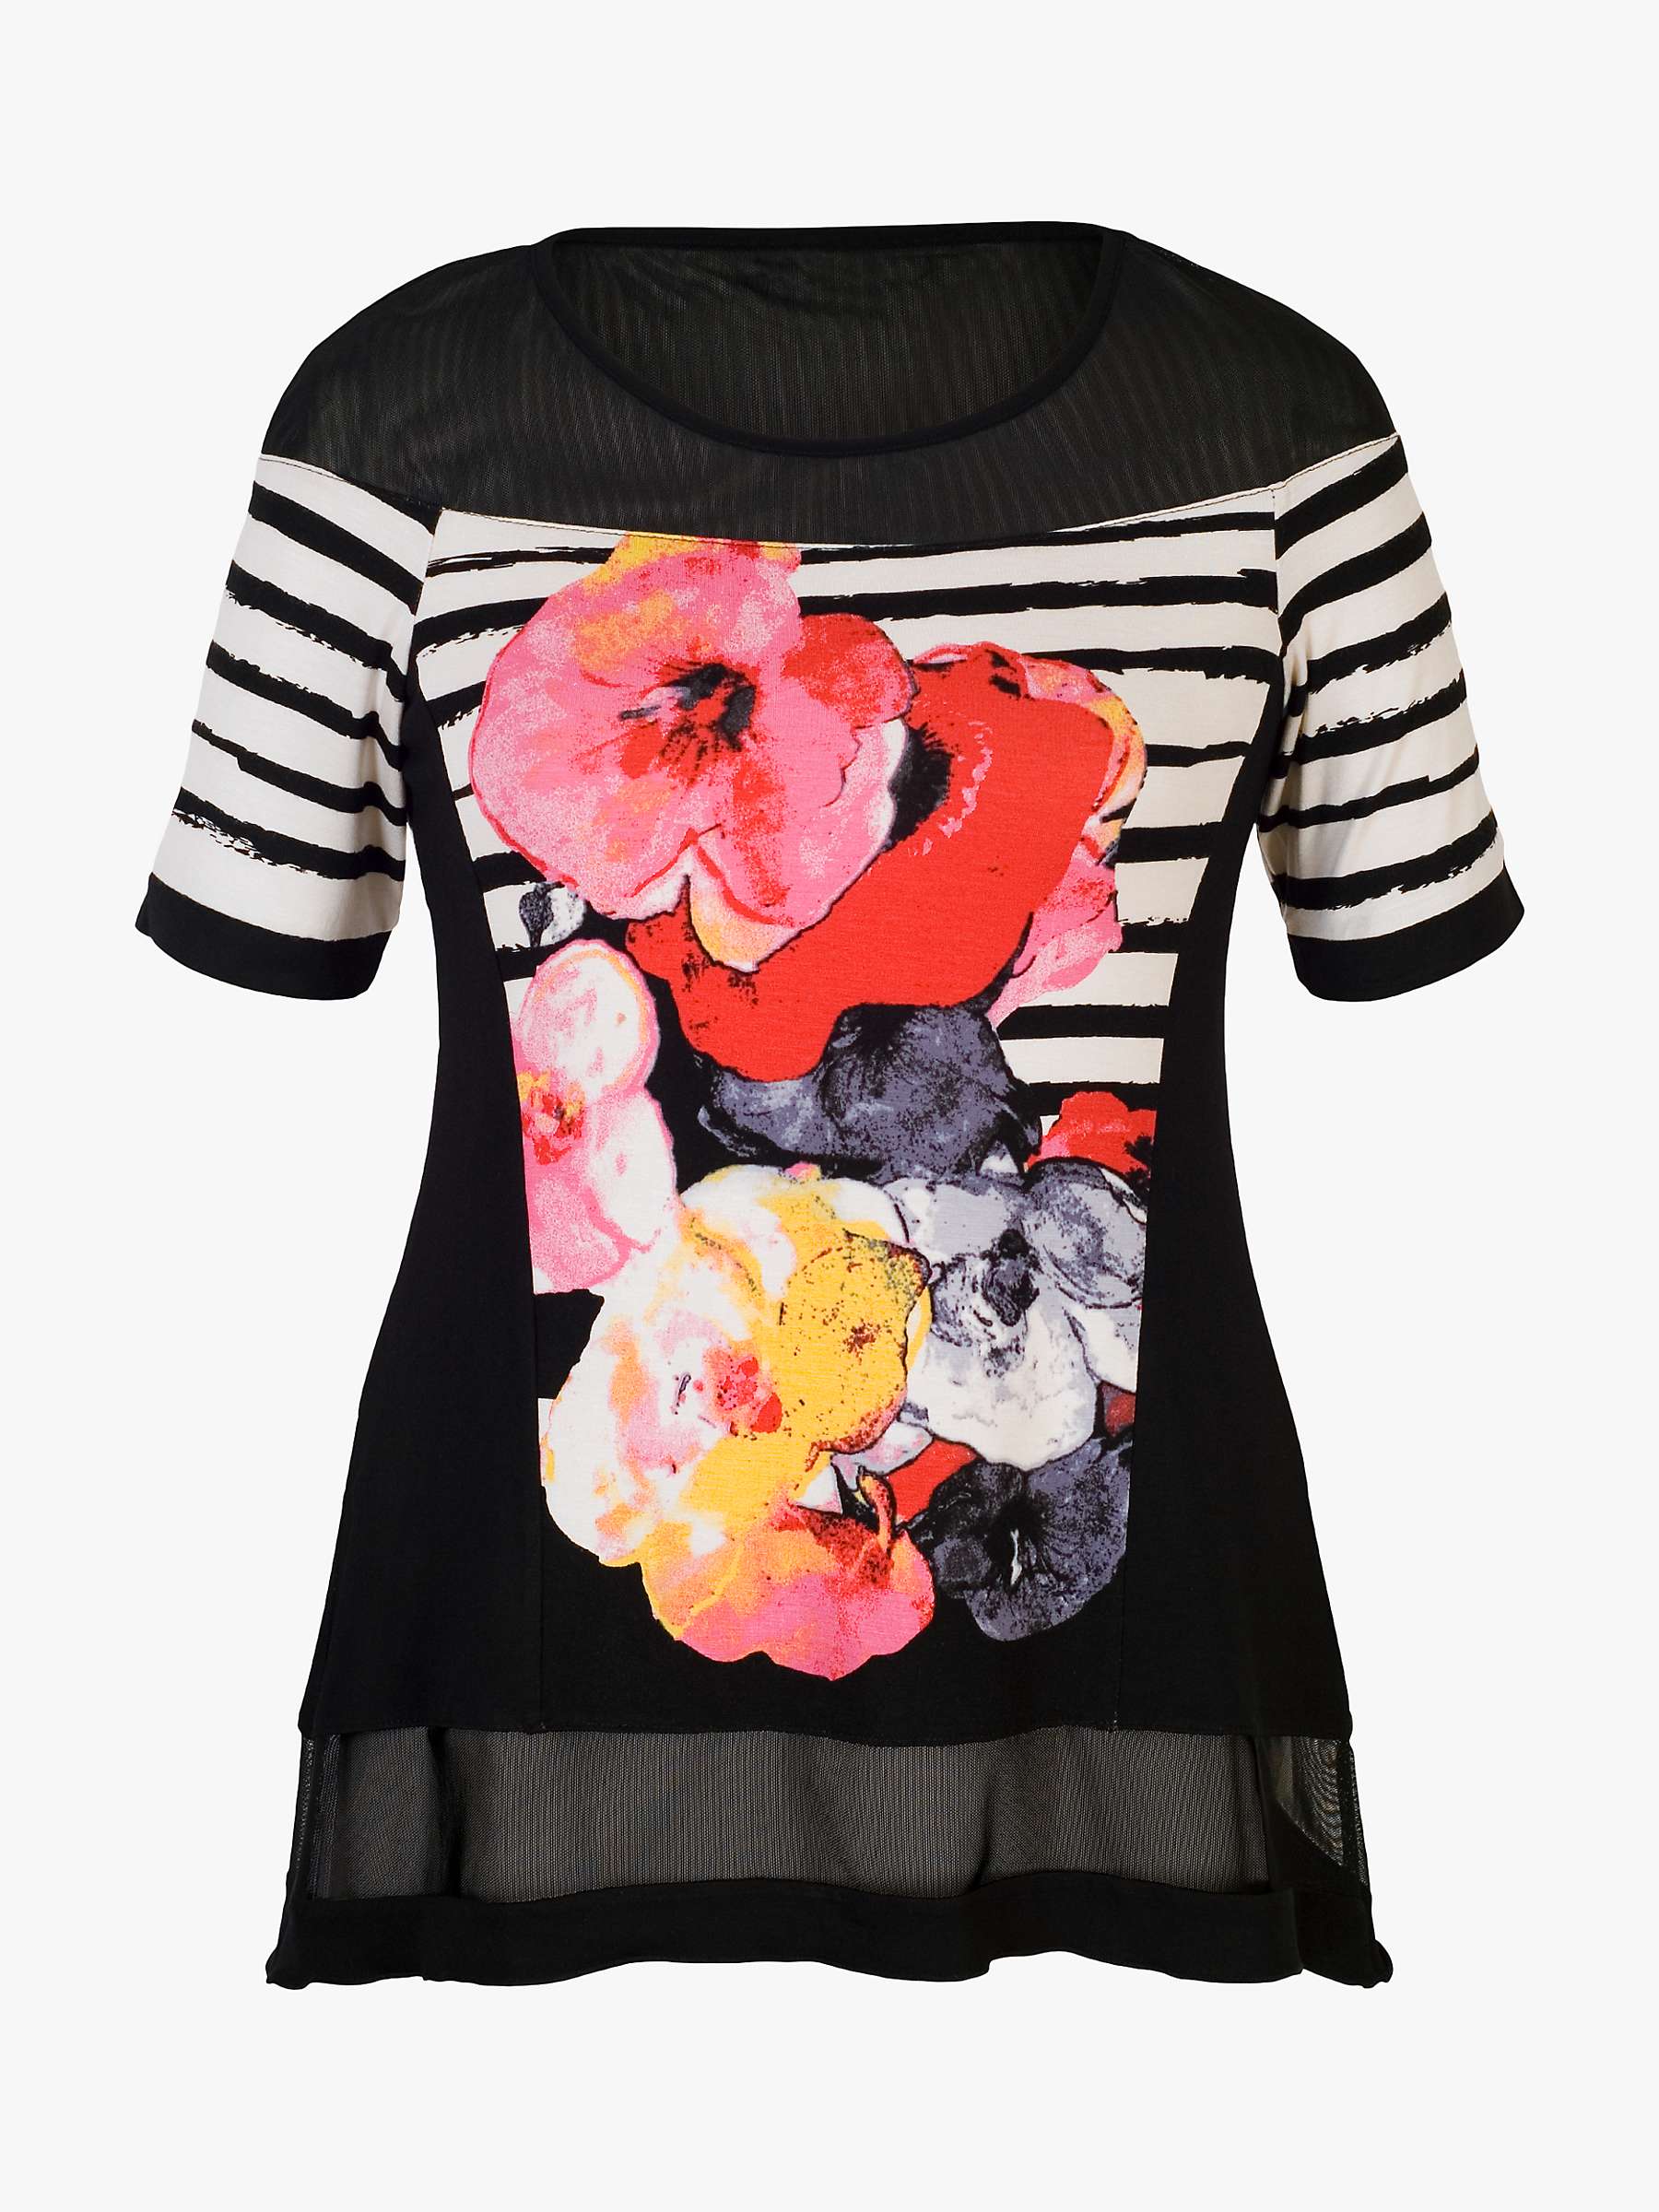 Buy chesca Floral and Stripe Mesh Trim Jersey Top, Black/Multi Online at johnlewis.com